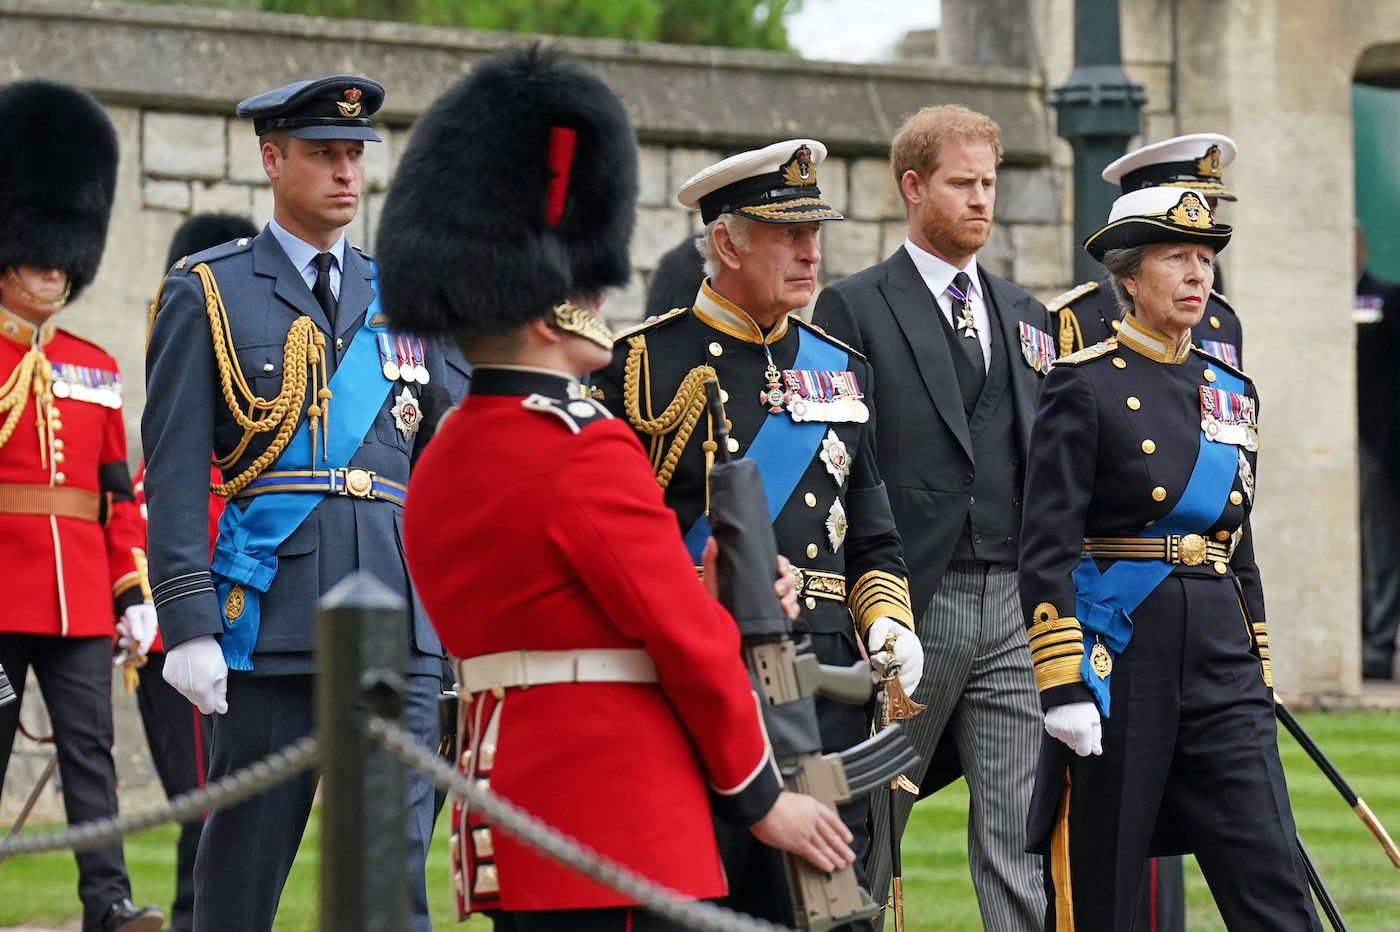 Prince Harry Book, ‘Spare’ Spells Royal Family Trouble, Astrologist Predicts [Exclusive]